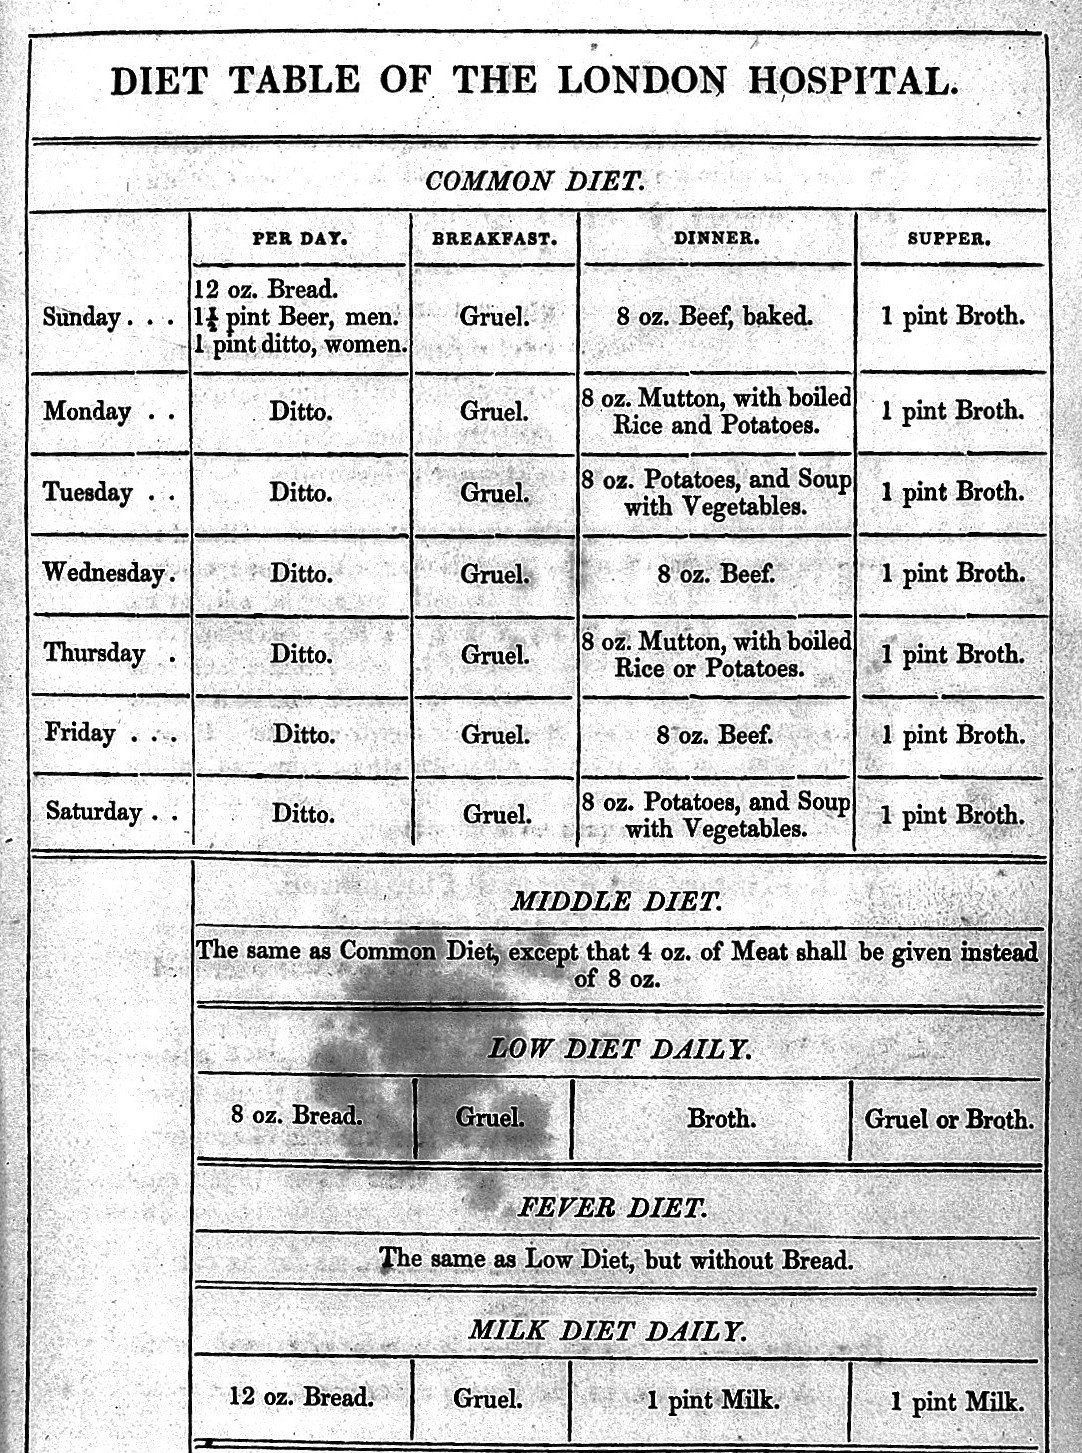 A table with the "Common Diet" of the London Hospital listed. Consists mostly of beer, gruel and broth, with beef or mutton for dinner.